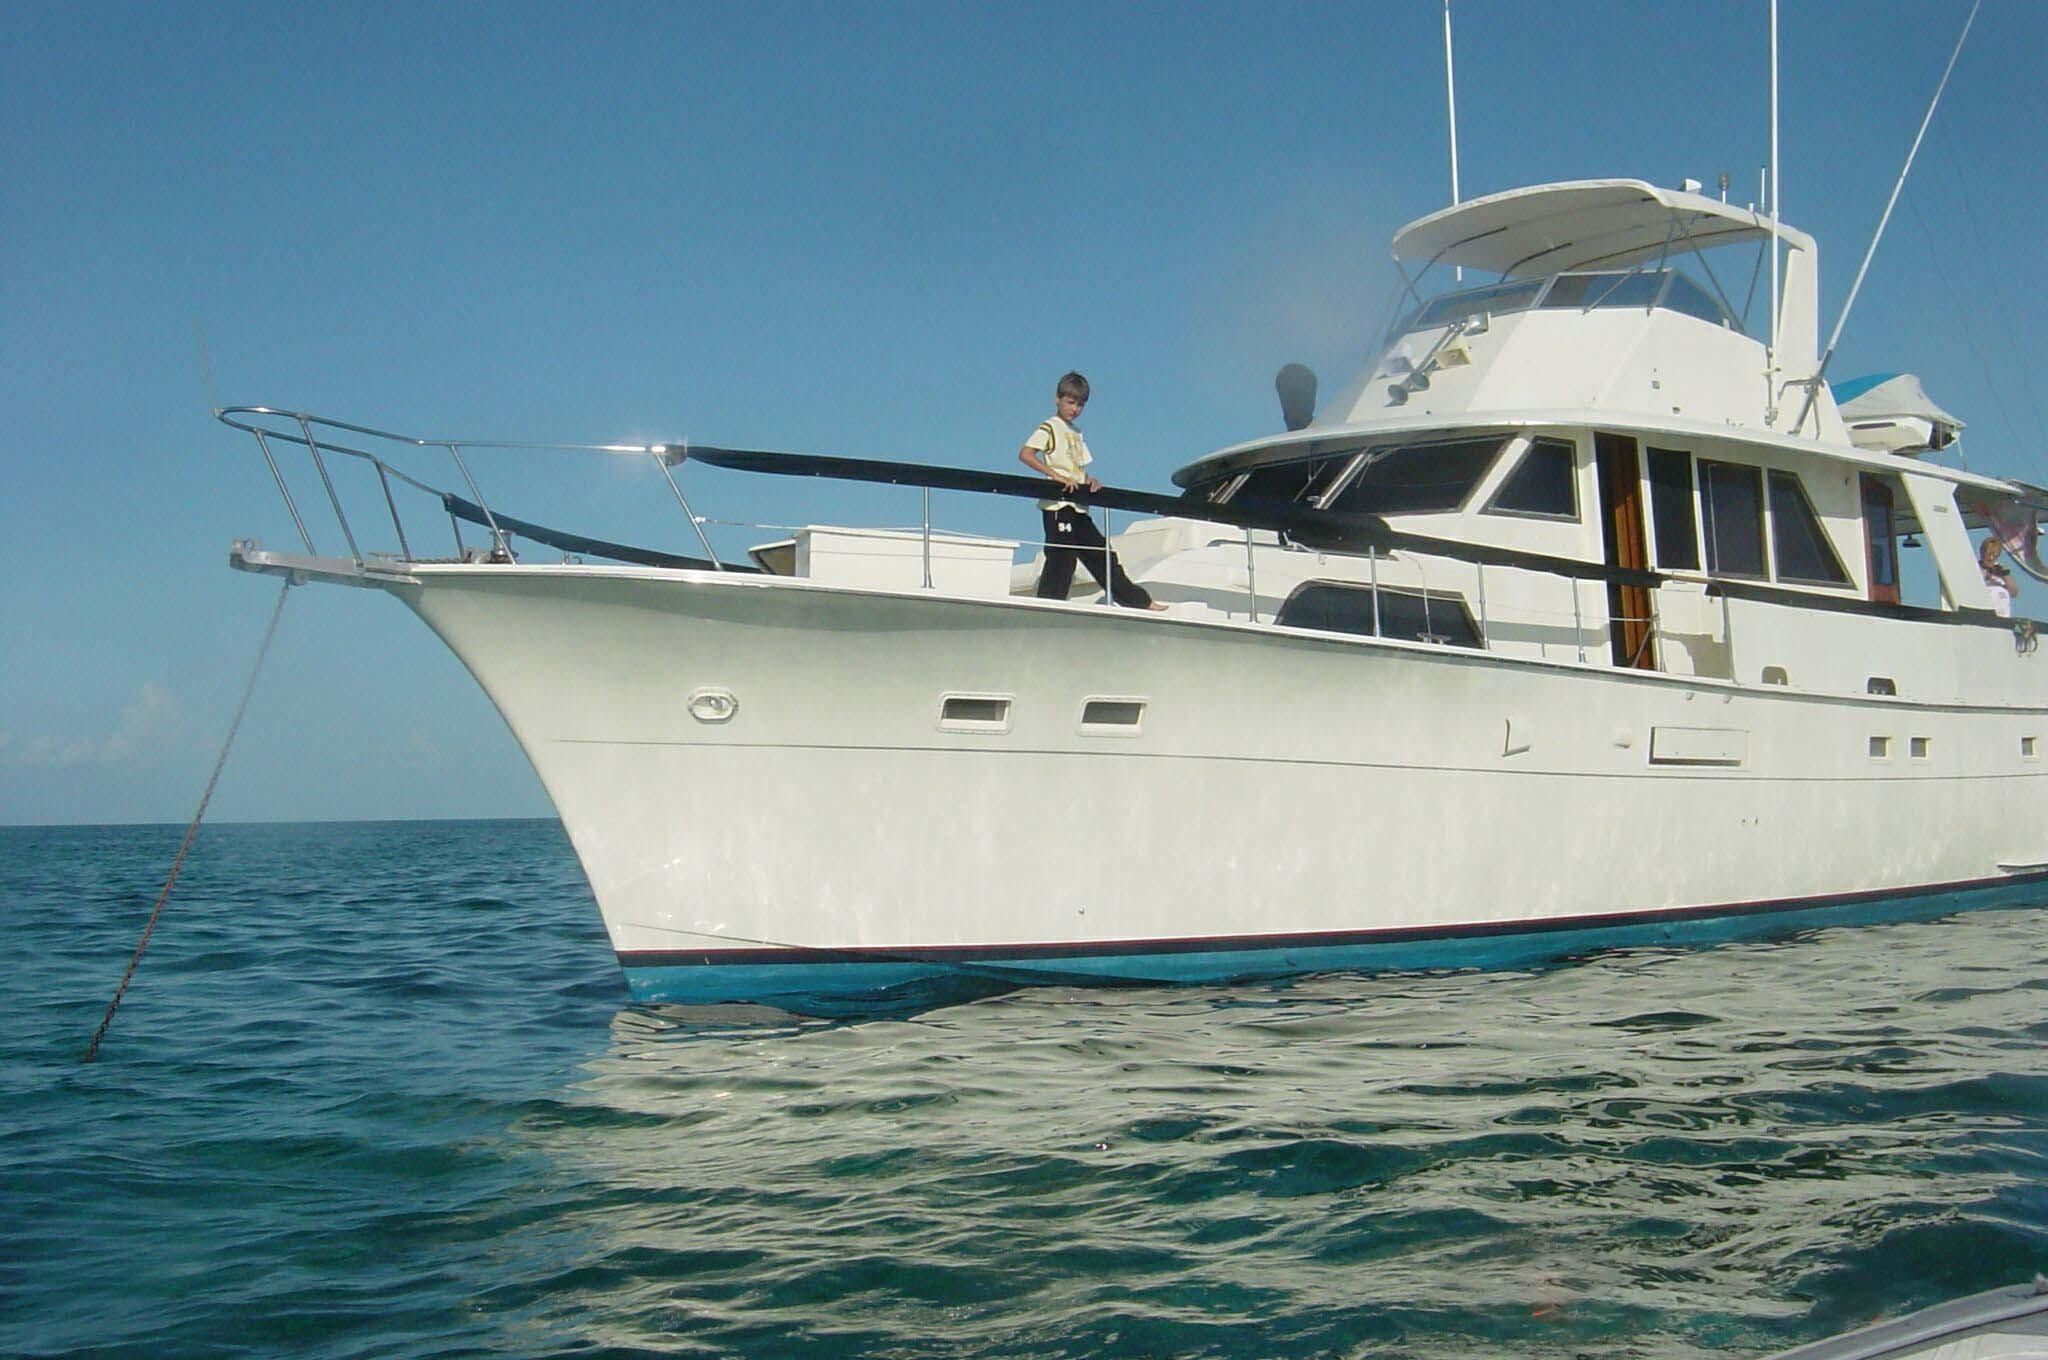 58 ft motor yacht for sale